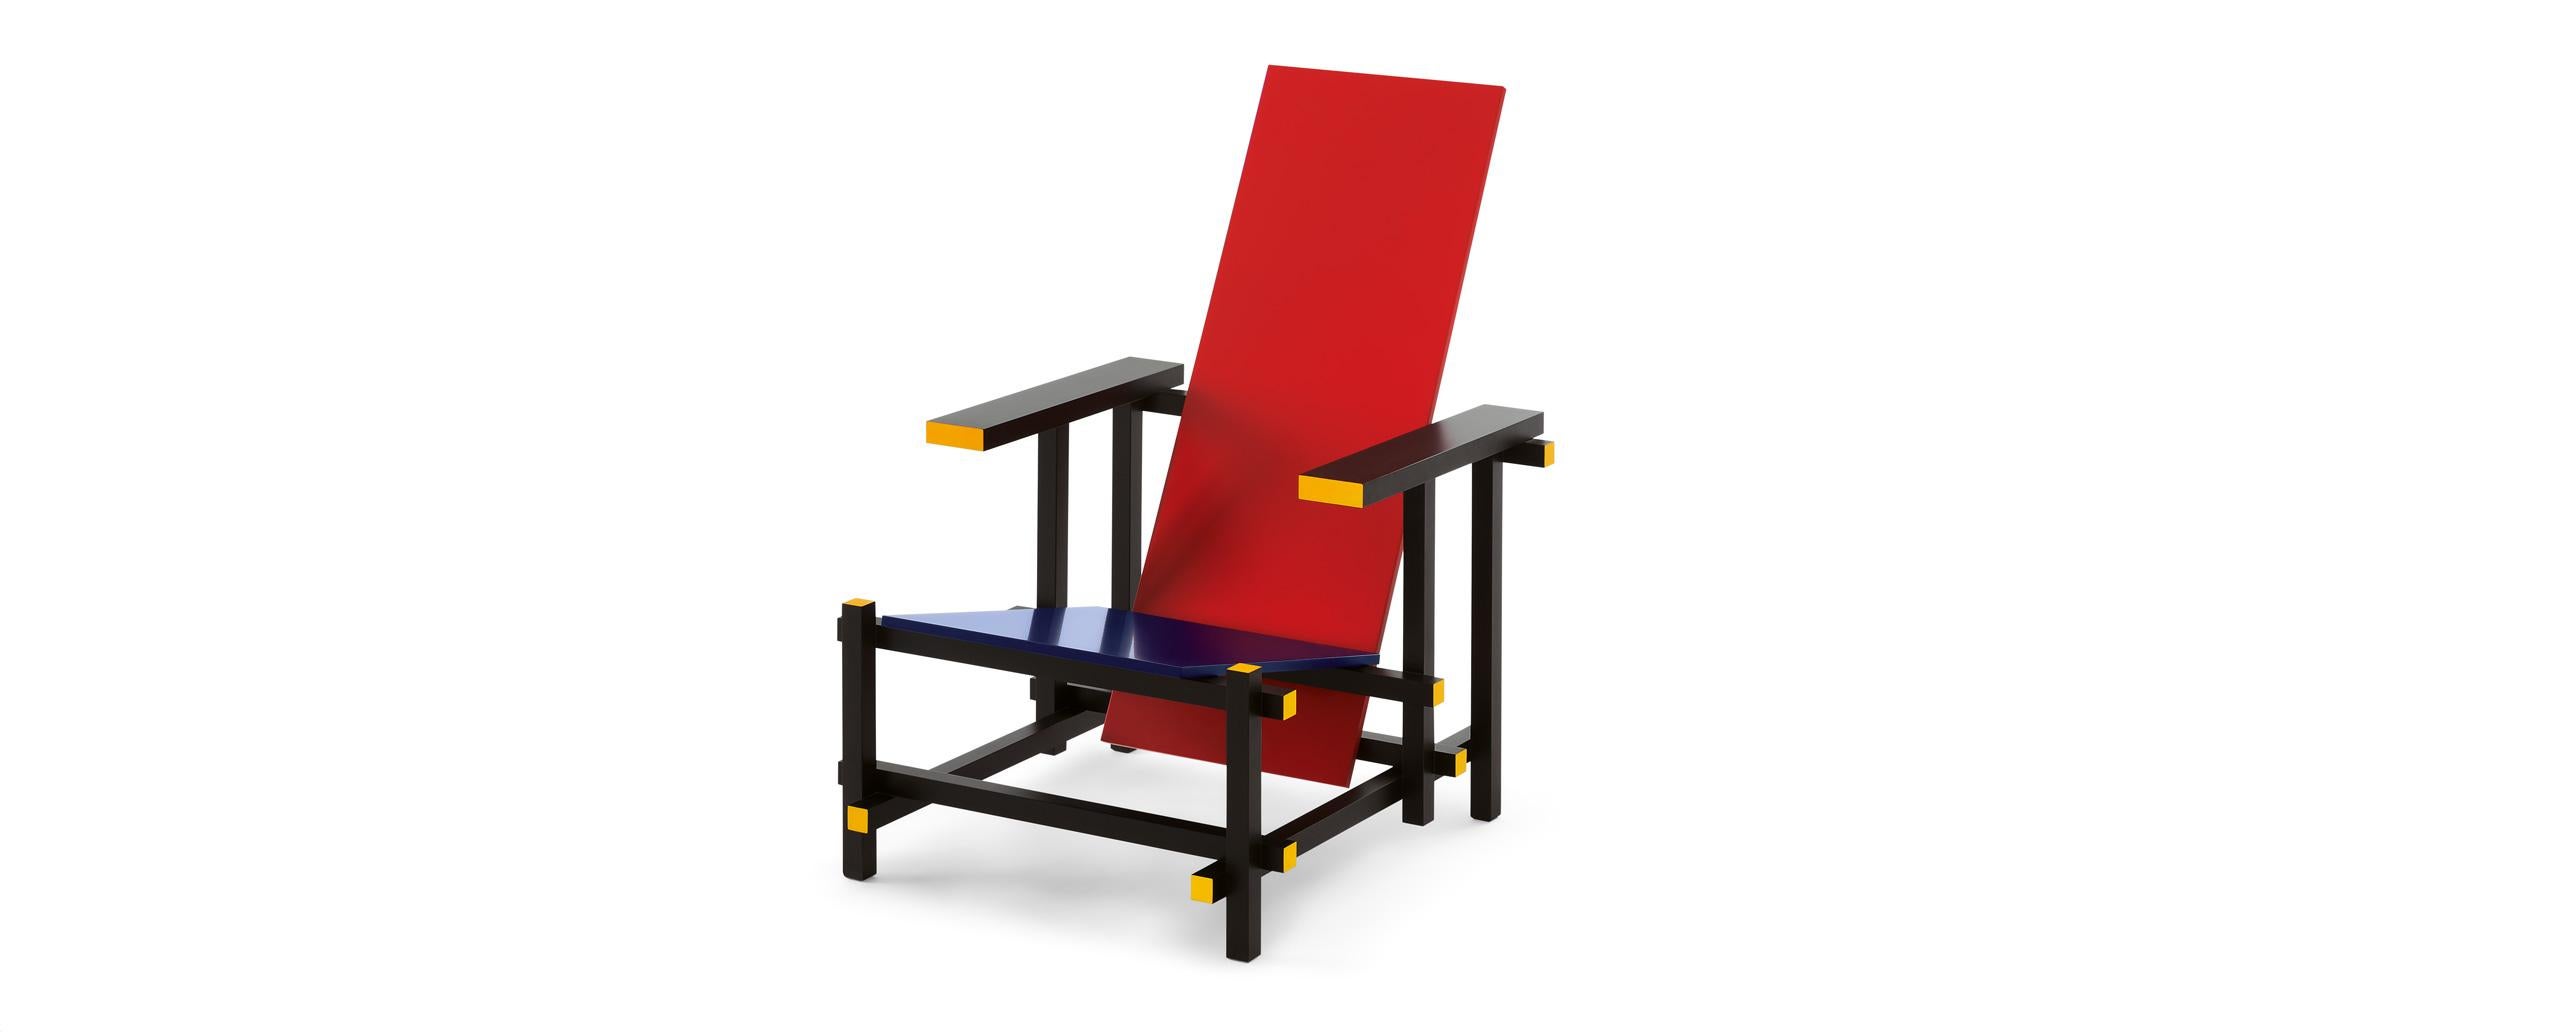 Gerrit Rietveld Red and Blue Chair by Cassina In New Condition For Sale In Barcelona, Barcelona